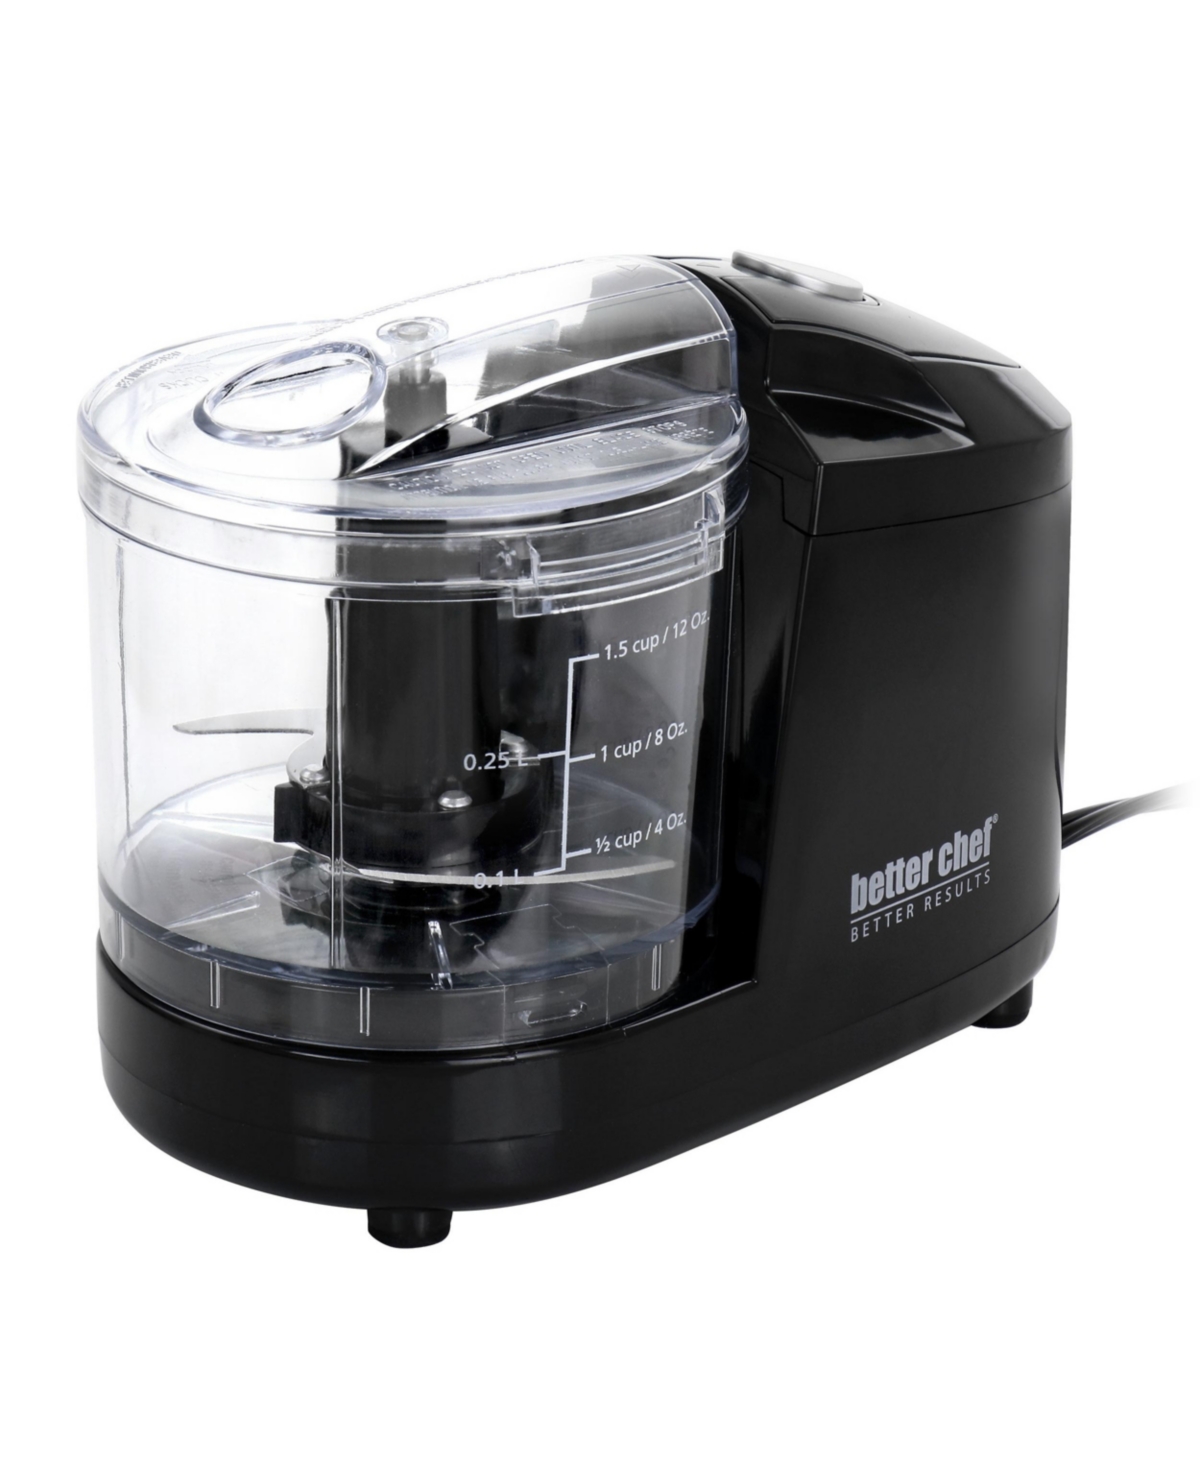 Better Chef 1.5 Cup Safety Lock Compact Chopper in Black